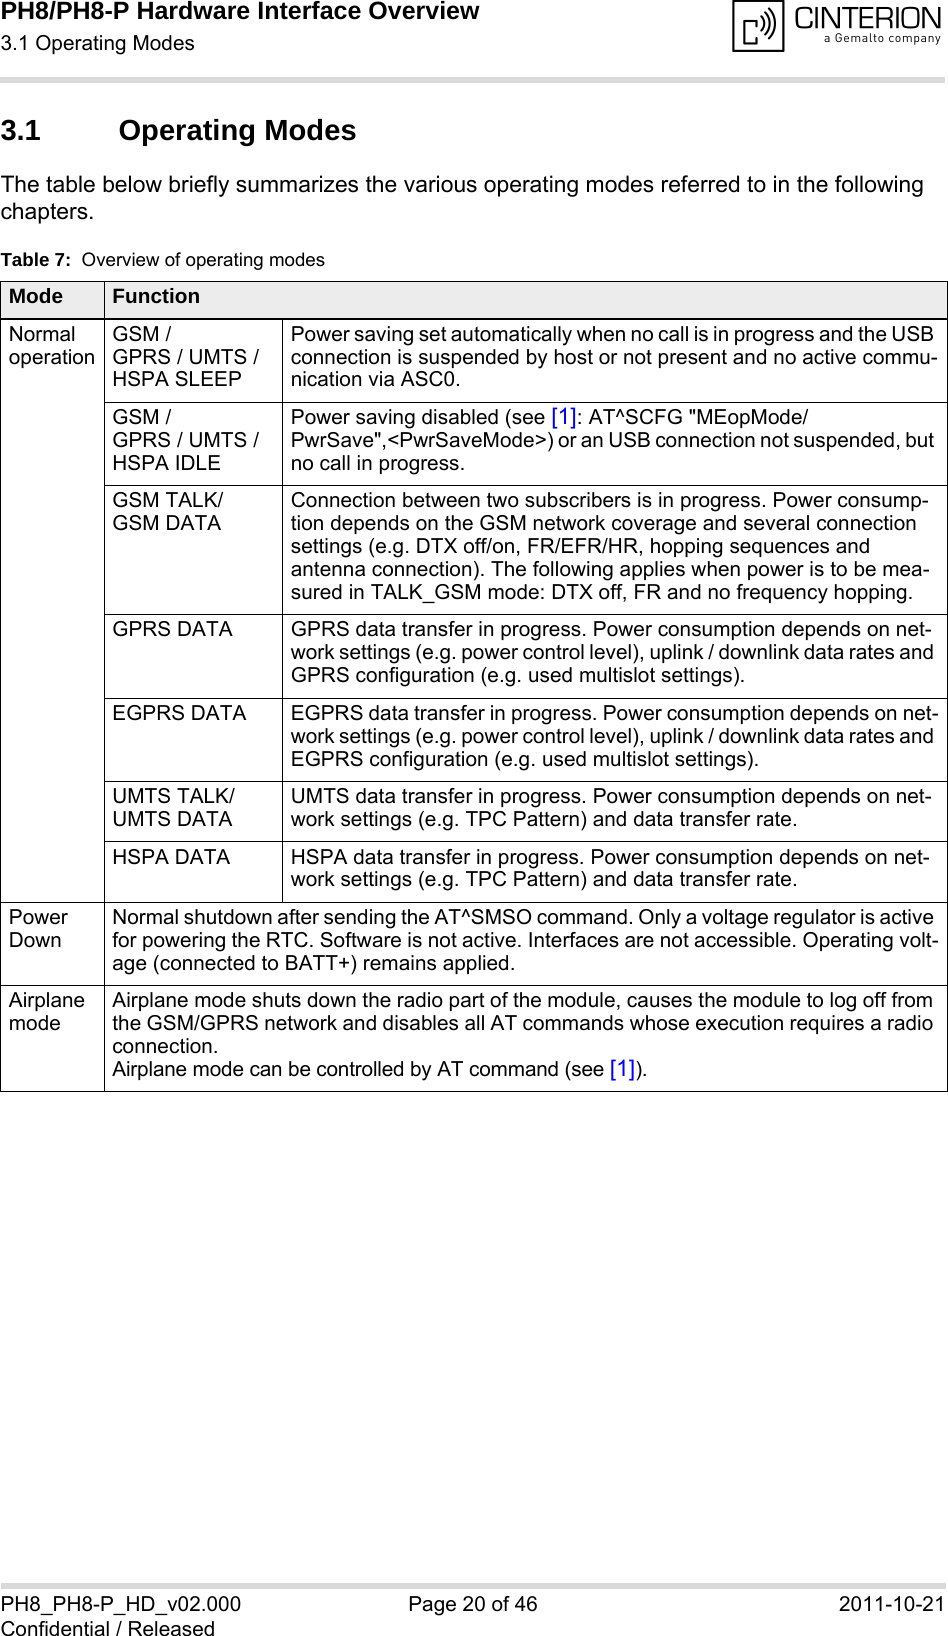 PH8/PH8-P Hardware Interface Overview3.1 Operating Modes28PH8_PH8-P_HD_v02.000 Page 20 of 46 2011-10-21Confidential / Released3.1 Operating ModesThe table below briefly summarizes the various operating modes referred to in the following chapters.Table 7:  Overview of operating modesMode FunctionNormal operationGSM / GPRS / UMTS / HSPA SLEEPPower saving set automatically when no call is in progress and the USB connection is suspended by host or not present and no active commu-nication via ASC0. GSM / GPRS / UMTS / HSPA IDLEPower saving disabled (see [1]: AT^SCFG &quot;MEopMode/PwrSave&quot;,&lt;PwrSaveMode&gt;) or an USB connection not suspended, but no call in progress.GSM TALK/GSM DATAConnection between two subscribers is in progress. Power consump-tion depends on the GSM network coverage and several connection settings (e.g. DTX off/on, FR/EFR/HR, hopping sequences and antenna connection). The following applies when power is to be mea-sured in TALK_GSM mode: DTX off, FR and no frequency hopping.GPRS DATA GPRS data transfer in progress. Power consumption depends on net-work settings (e.g. power control level), uplink / downlink data rates and GPRS configuration (e.g. used multislot settings).EGPRS DATA EGPRS data transfer in progress. Power consumption depends on net-work settings (e.g. power control level), uplink / downlink data rates and EGPRS configuration (e.g. used multislot settings).UMTS TALK/UMTS DATAUMTS data transfer in progress. Power consumption depends on net-work settings (e.g. TPC Pattern) and data transfer rate.HSPA DATA HSPA data transfer in progress. Power consumption depends on net-work settings (e.g. TPC Pattern) and data transfer rate.Power DownNormal shutdown after sending the AT^SMSO command. Only a voltage regulator is active for powering the RTC. Software is not active. Interfaces are not accessible. Operating volt-age (connected to BATT+) remains applied.Airplane modeAirplane mode shuts down the radio part of the module, causes the module to log off from the GSM/GPRS network and disables all AT commands whose execution requires a radio connection.Airplane mode can be controlled by AT command (see [1]).